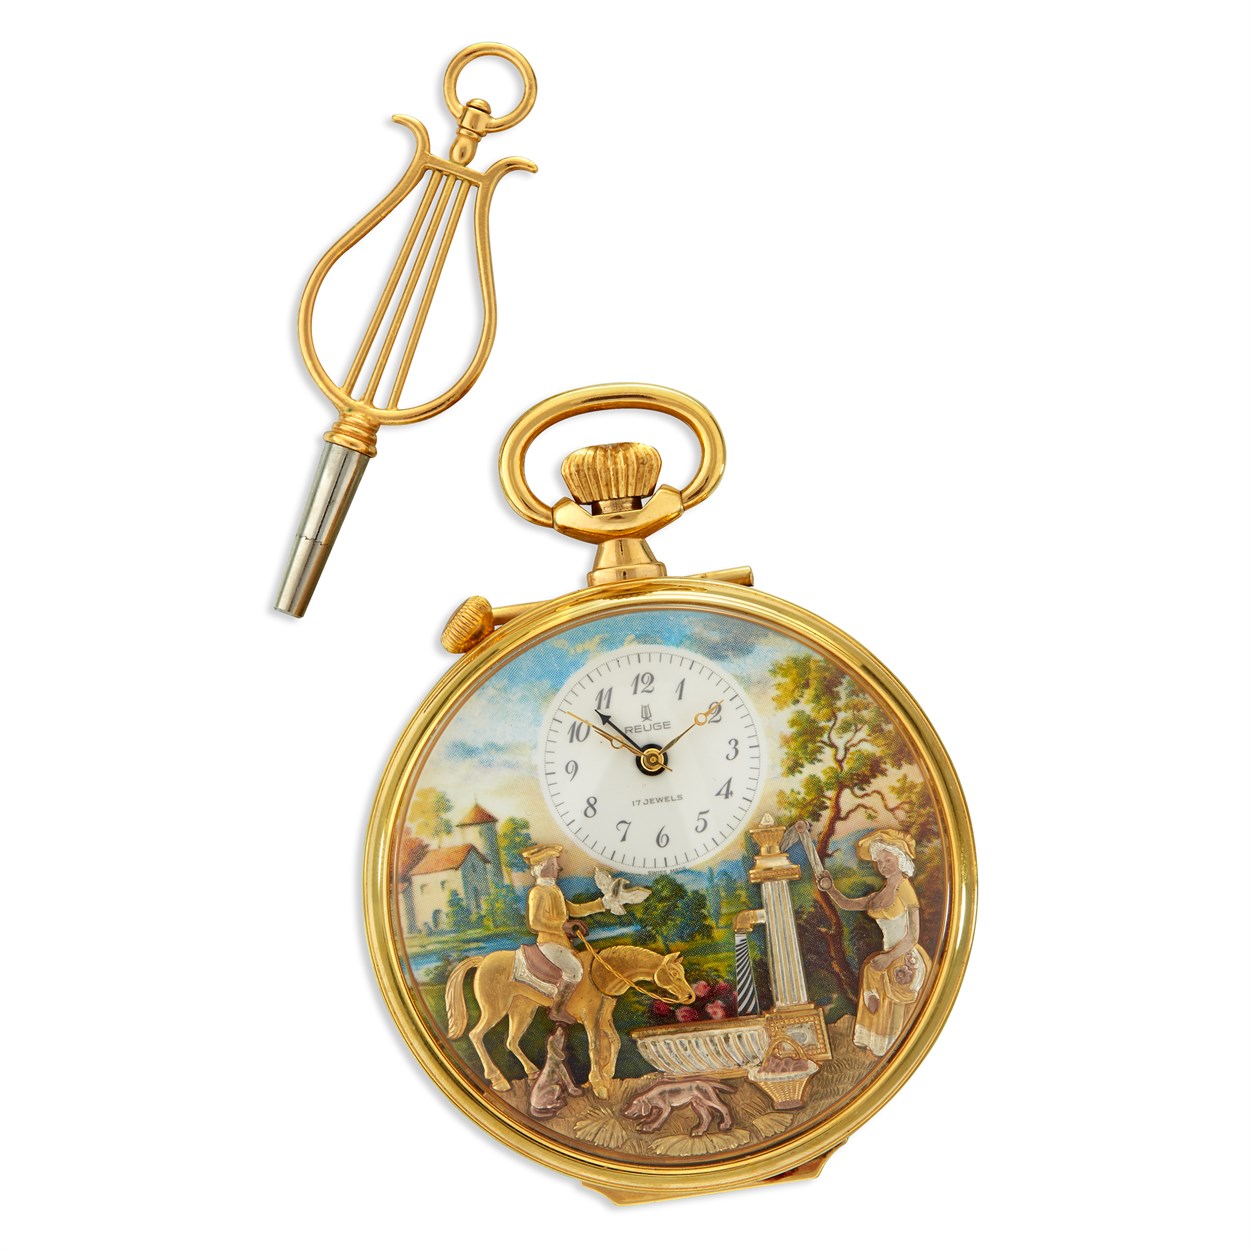 Lot 6 - A gold plated musical automaton pocket watch with alarm, Reuge